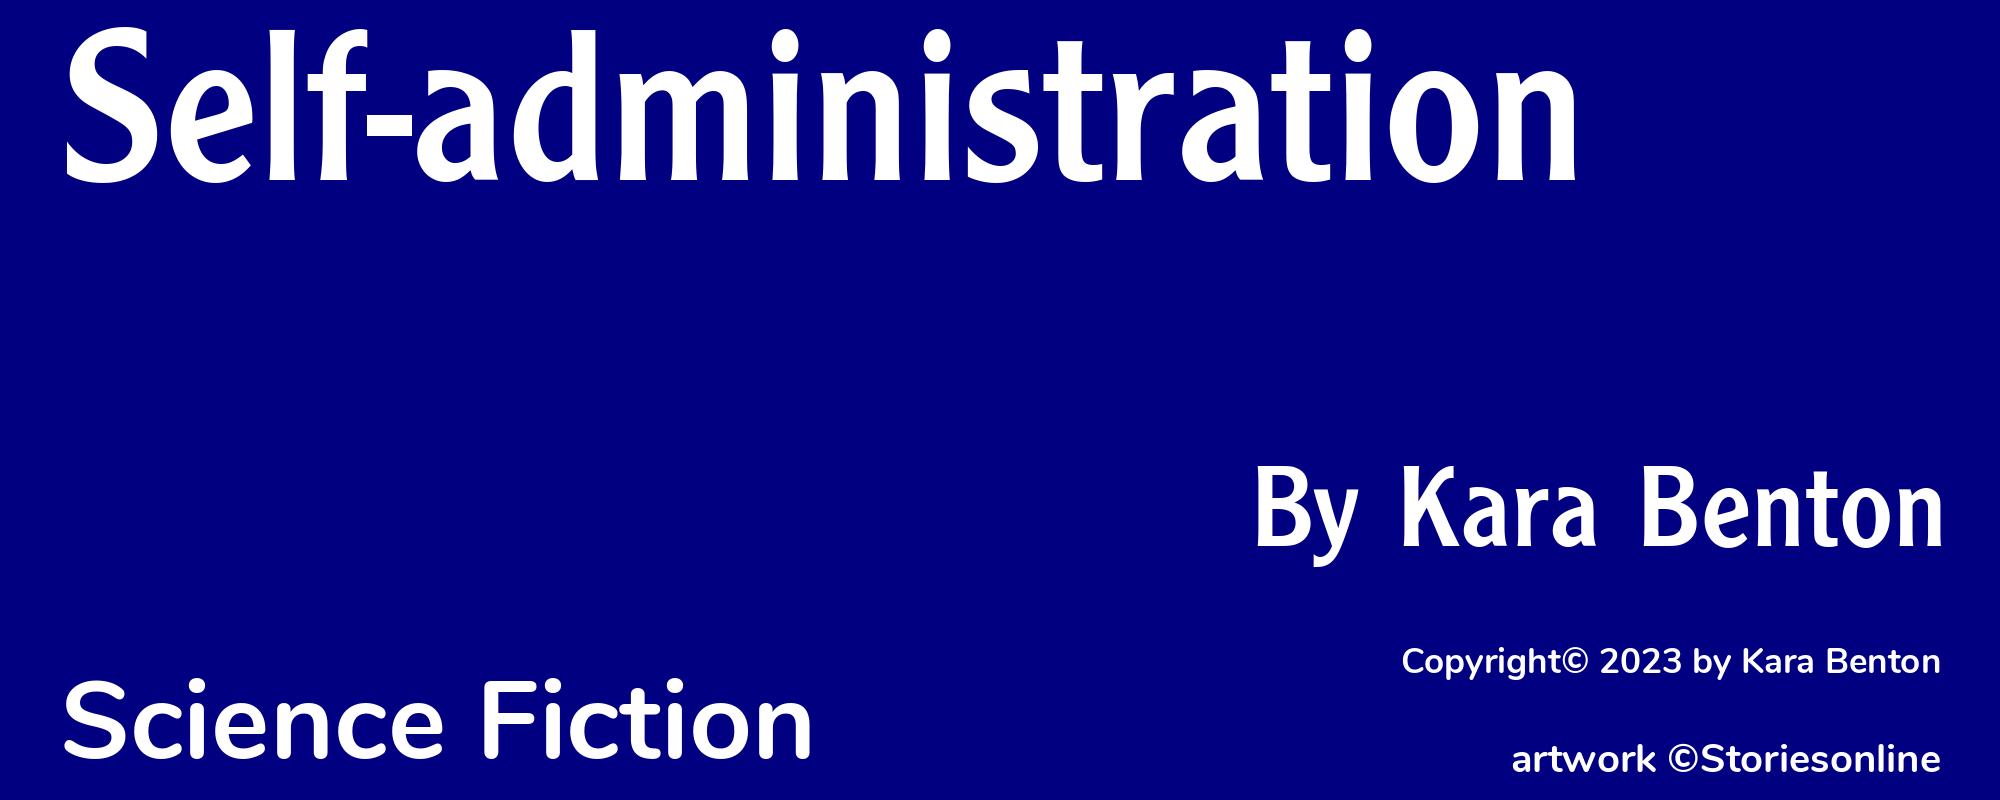 Self-administration - Cover